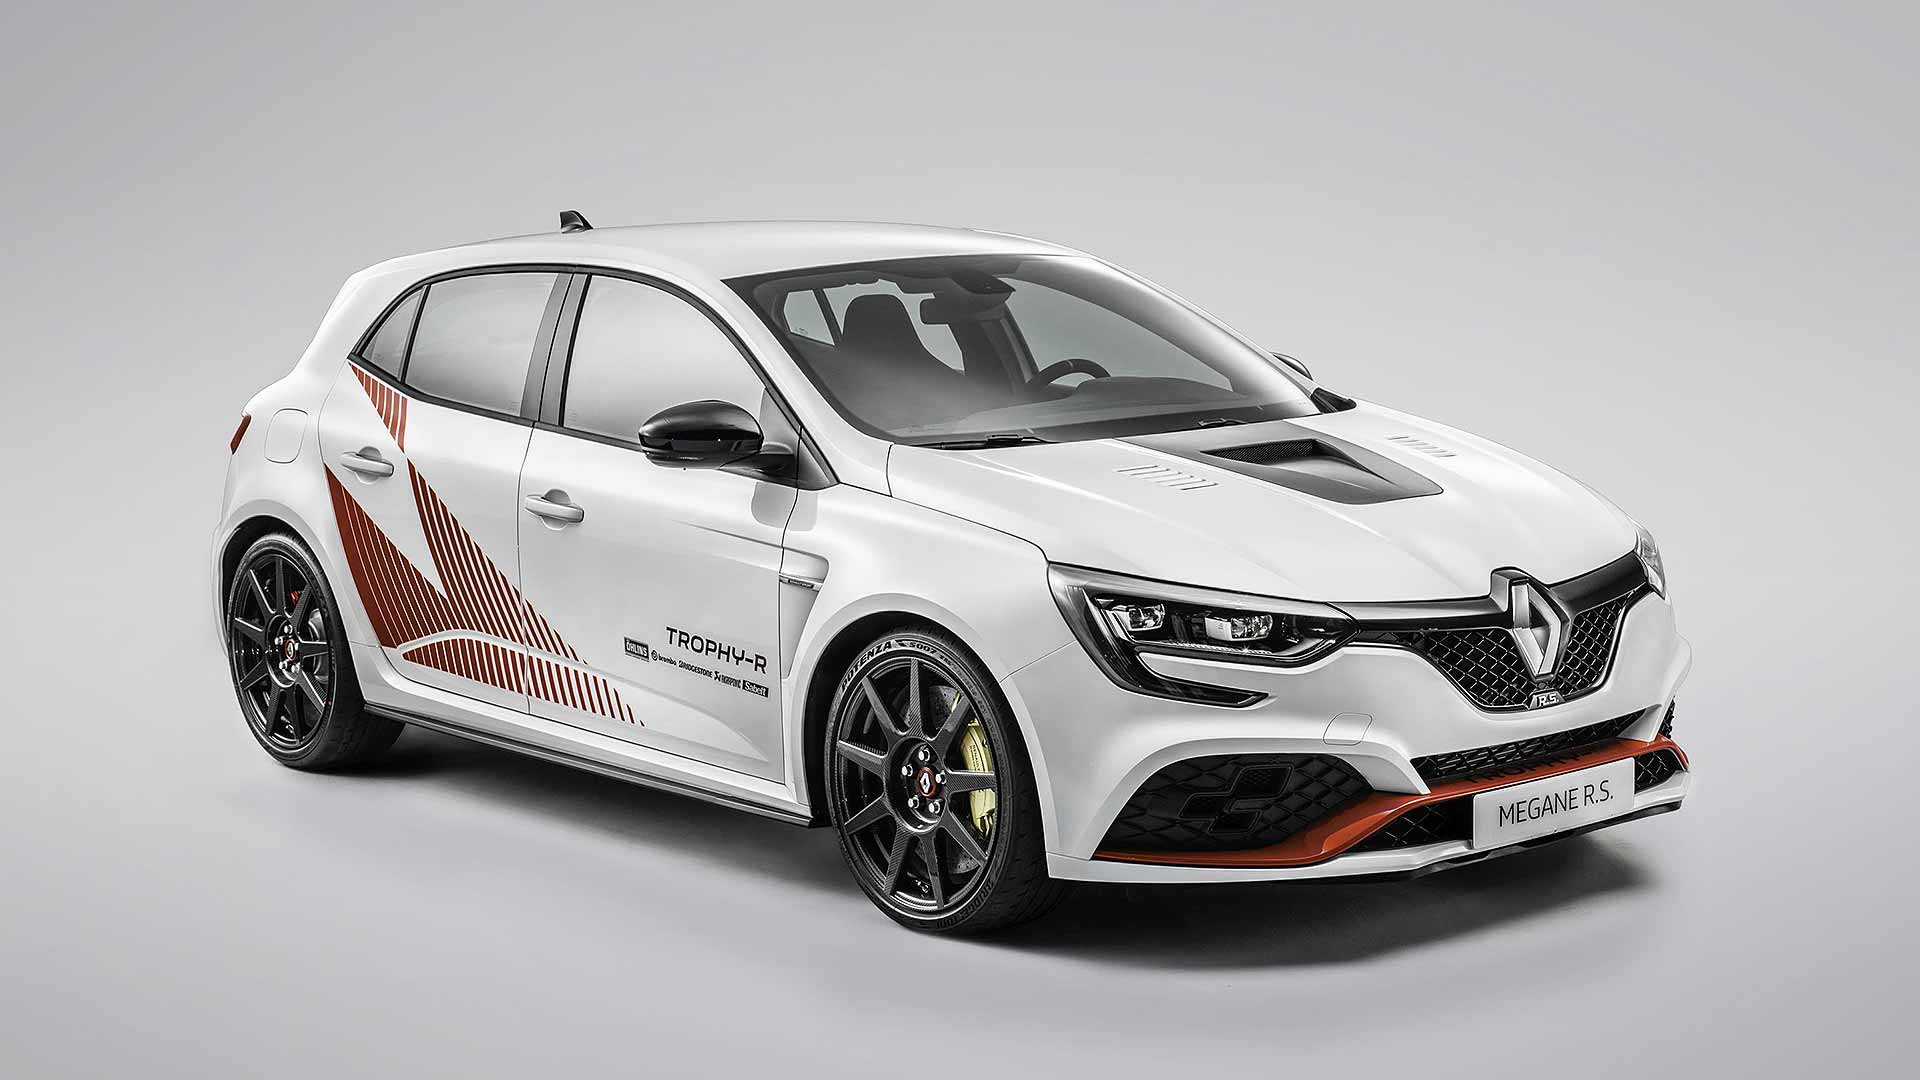 really is asking £72,140 for this new Megane